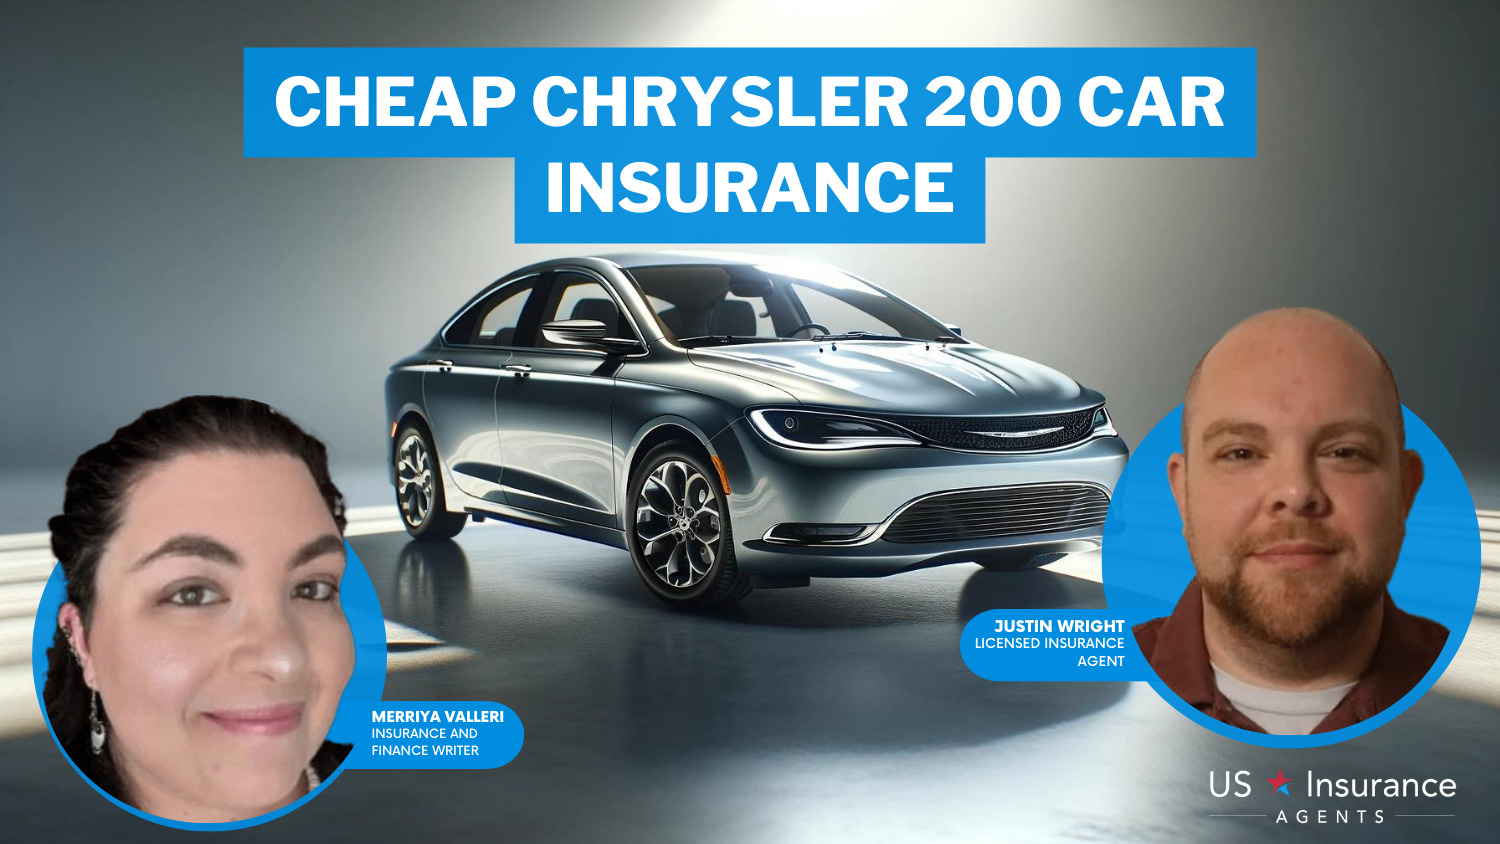 Cheap Chrysler 200 Car Insurance in 2024: Erie, Nationwide and Progressive